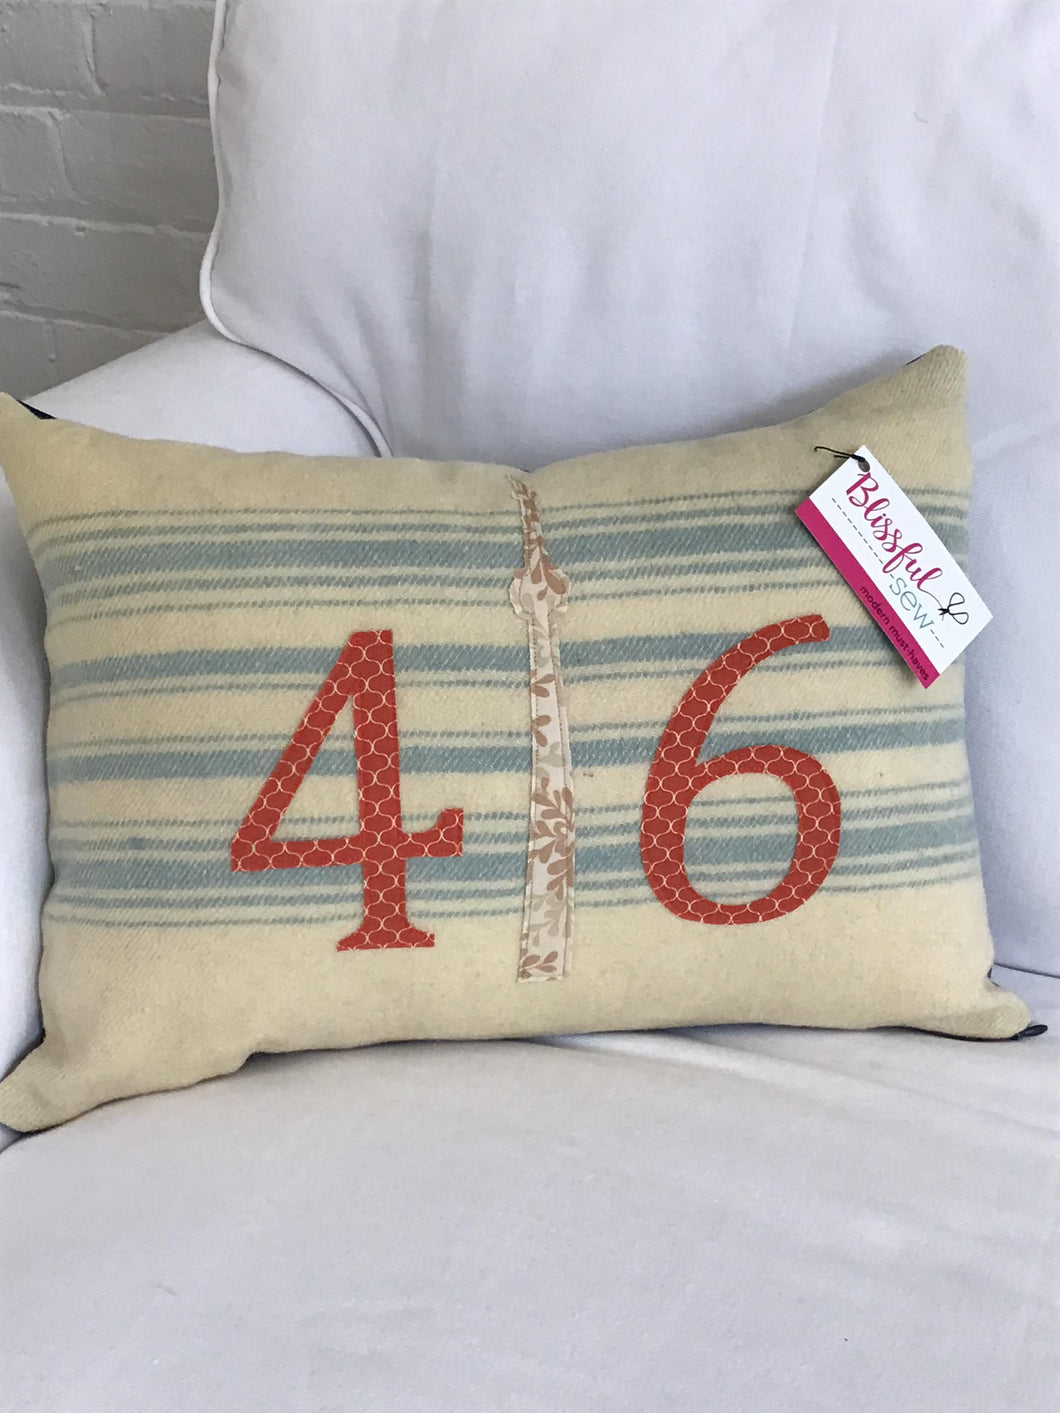 Felted Wool Blanket Pillow - Cream background with multiple robins egg blue stripes. Rust colored numbers and mottled cream CN Tower